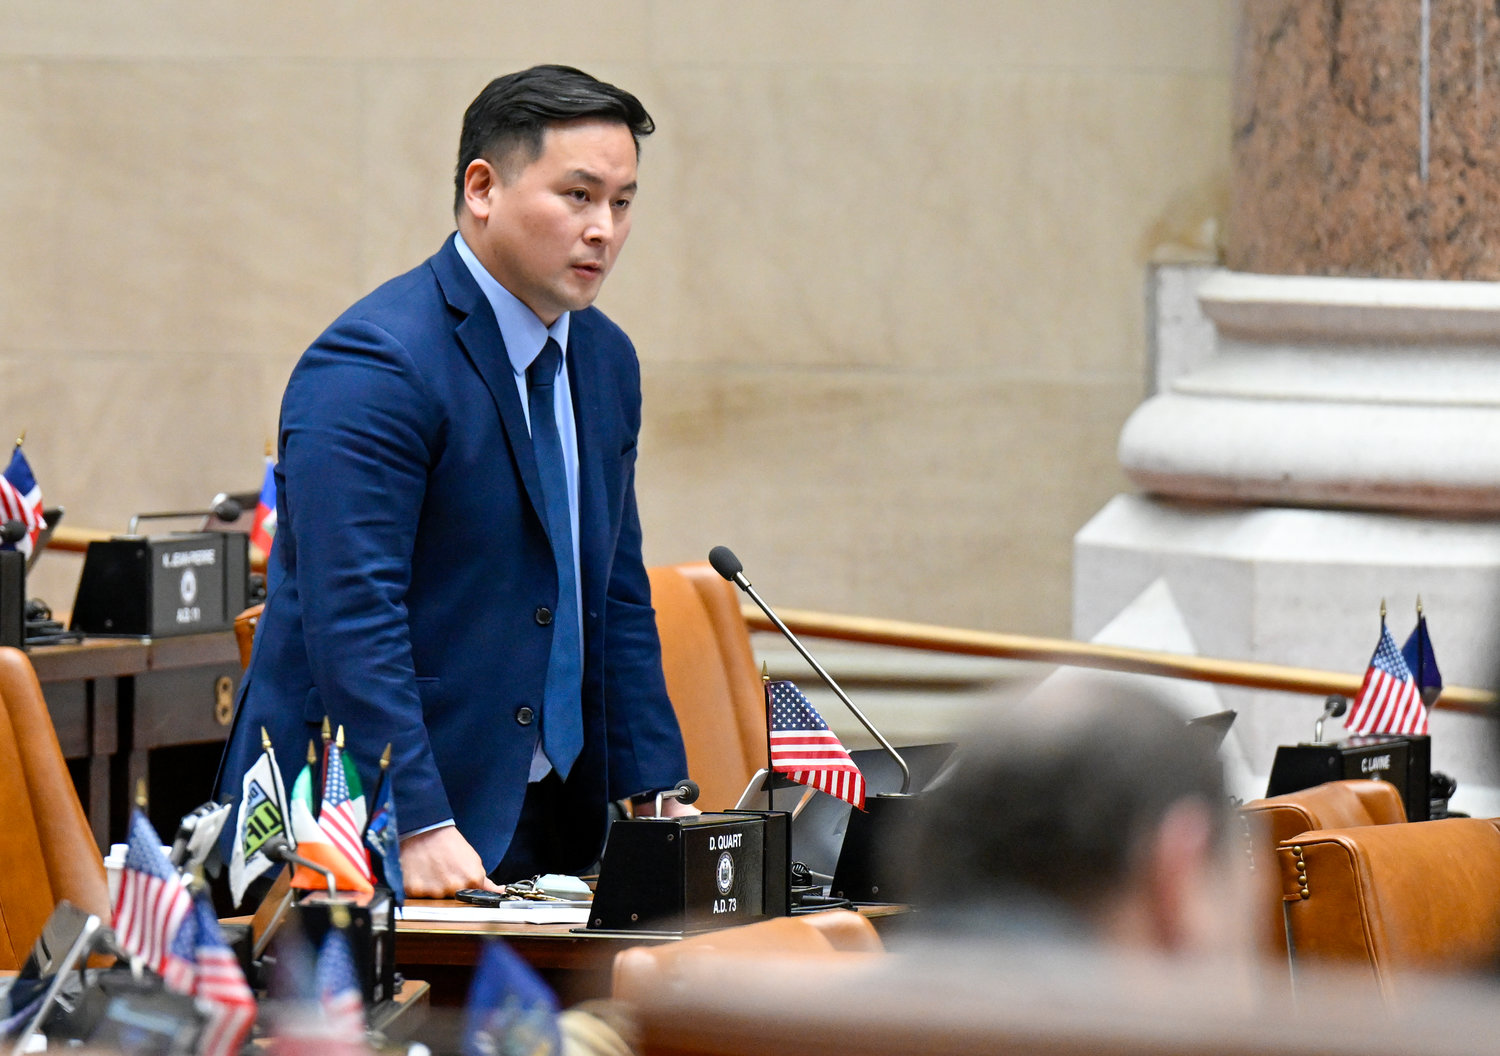 Assemblyman Ron Kim, D-Flushing, debates budget bills during a legislative session in the Assembly Chamber at the state Capitol, Friday, April 8, 2022, in Albany, N.Y. (AP Photo/Hans Pennink)